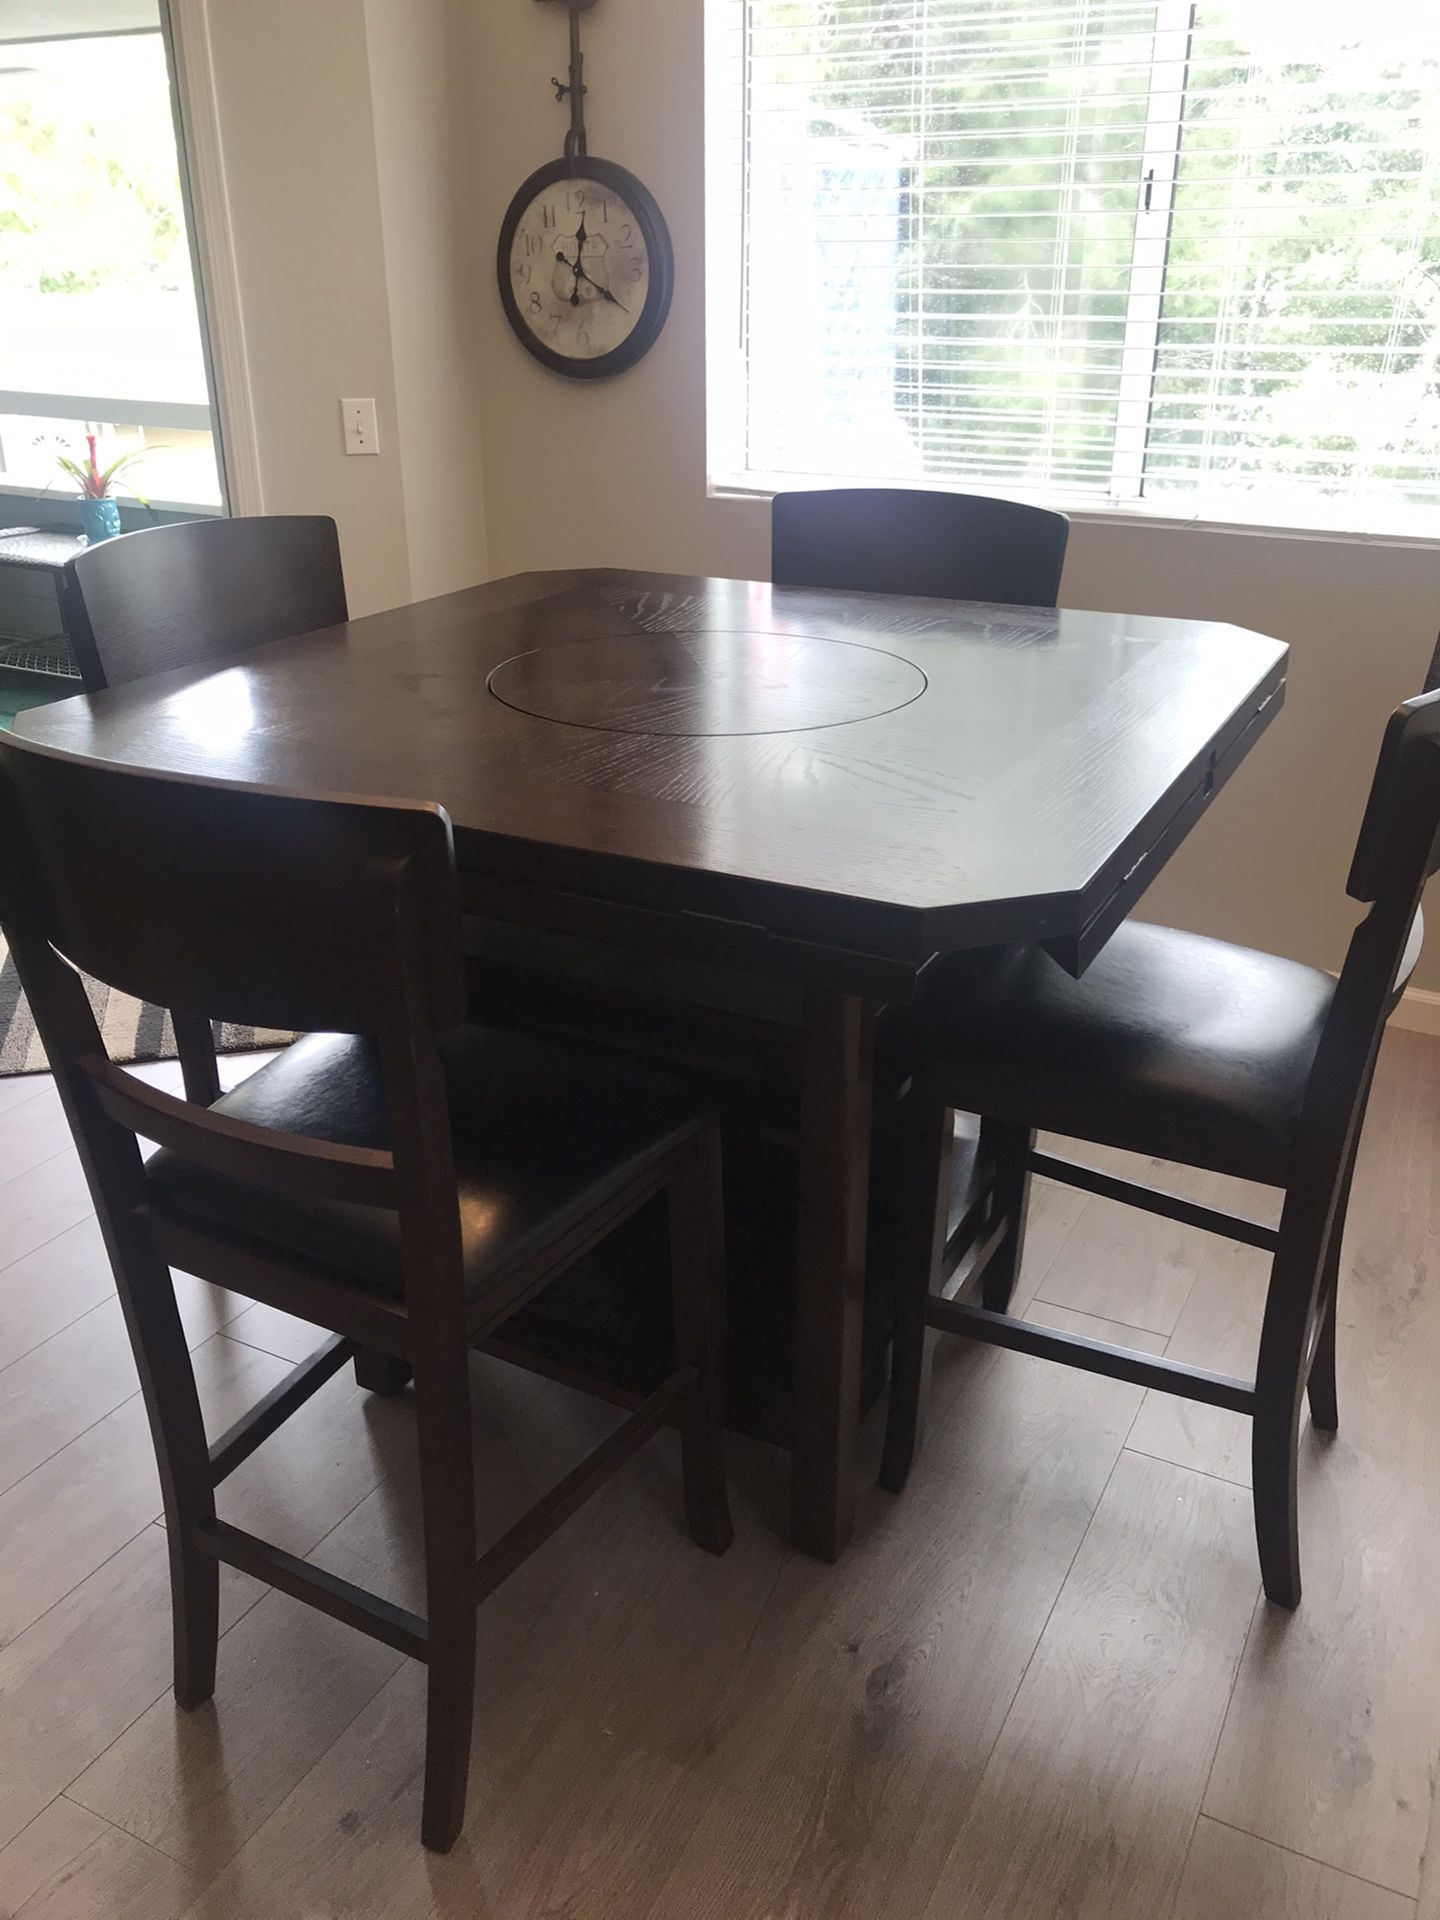 5 pc dining table with lazy susan and wine rack